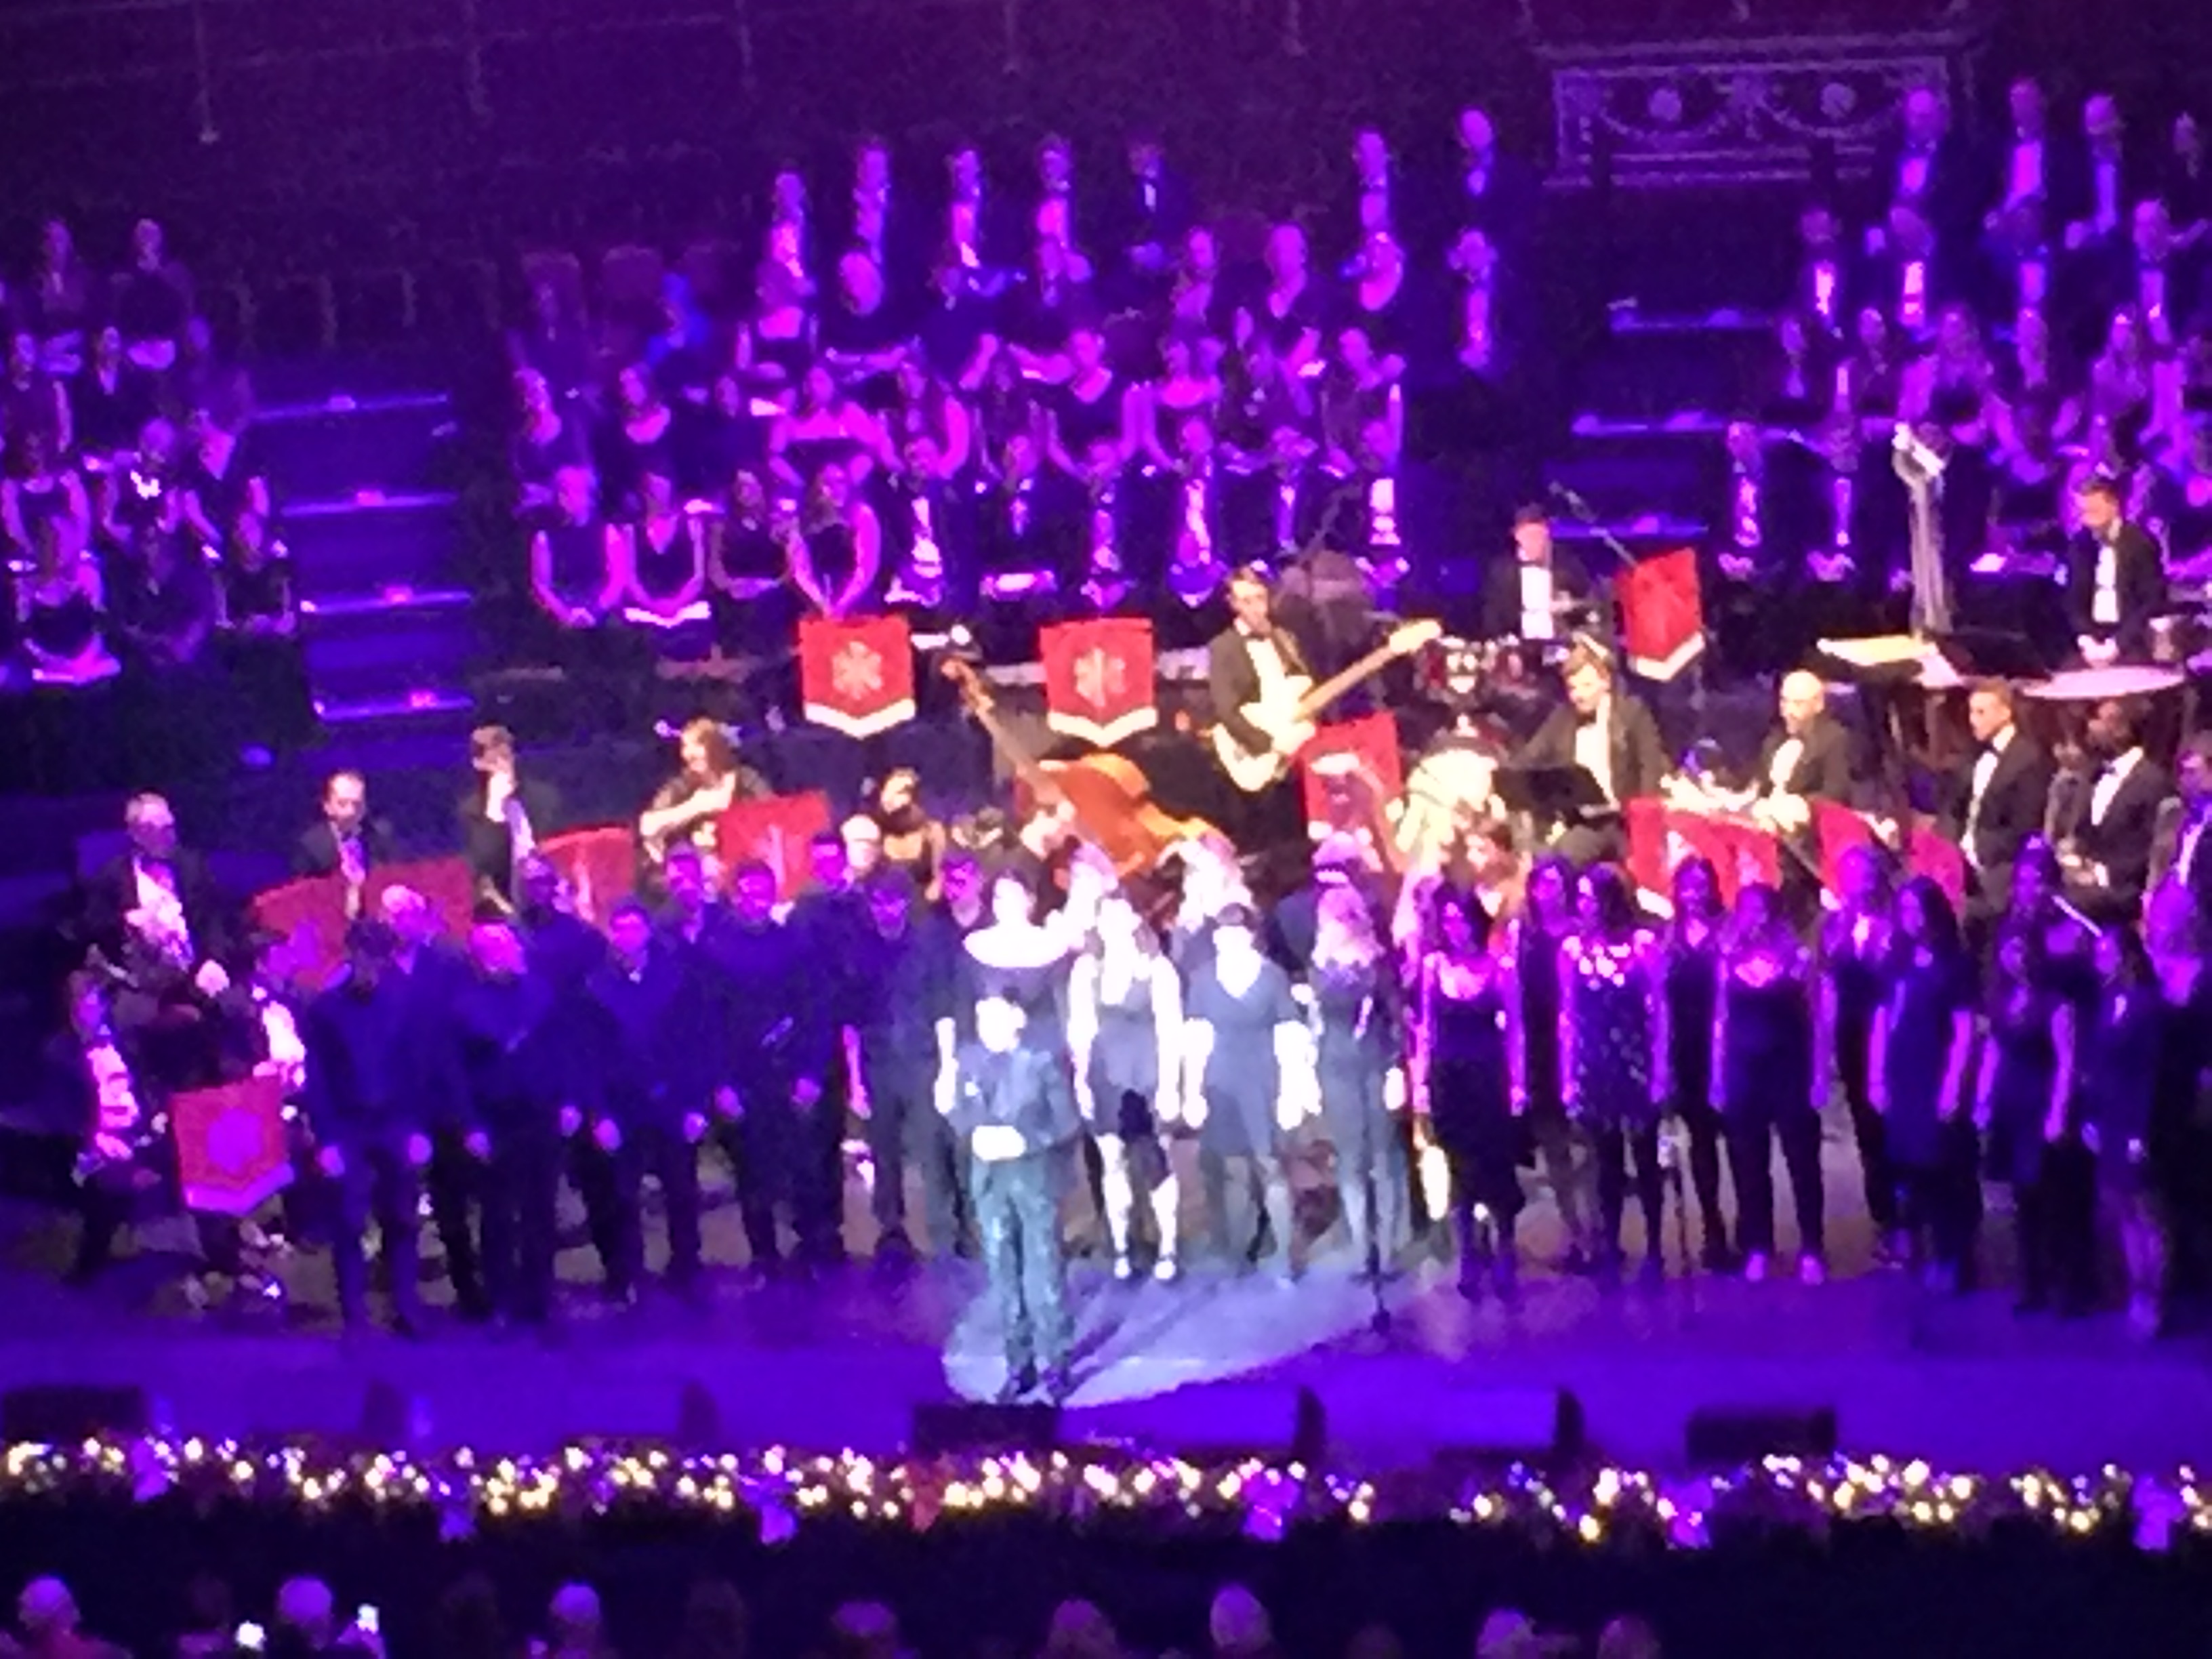 Performers on the stage. From front to back there is a solo singer, a line of backing singers, the band in a semi-circle, and a choir spanning multiple rows curving around the back of the stage.